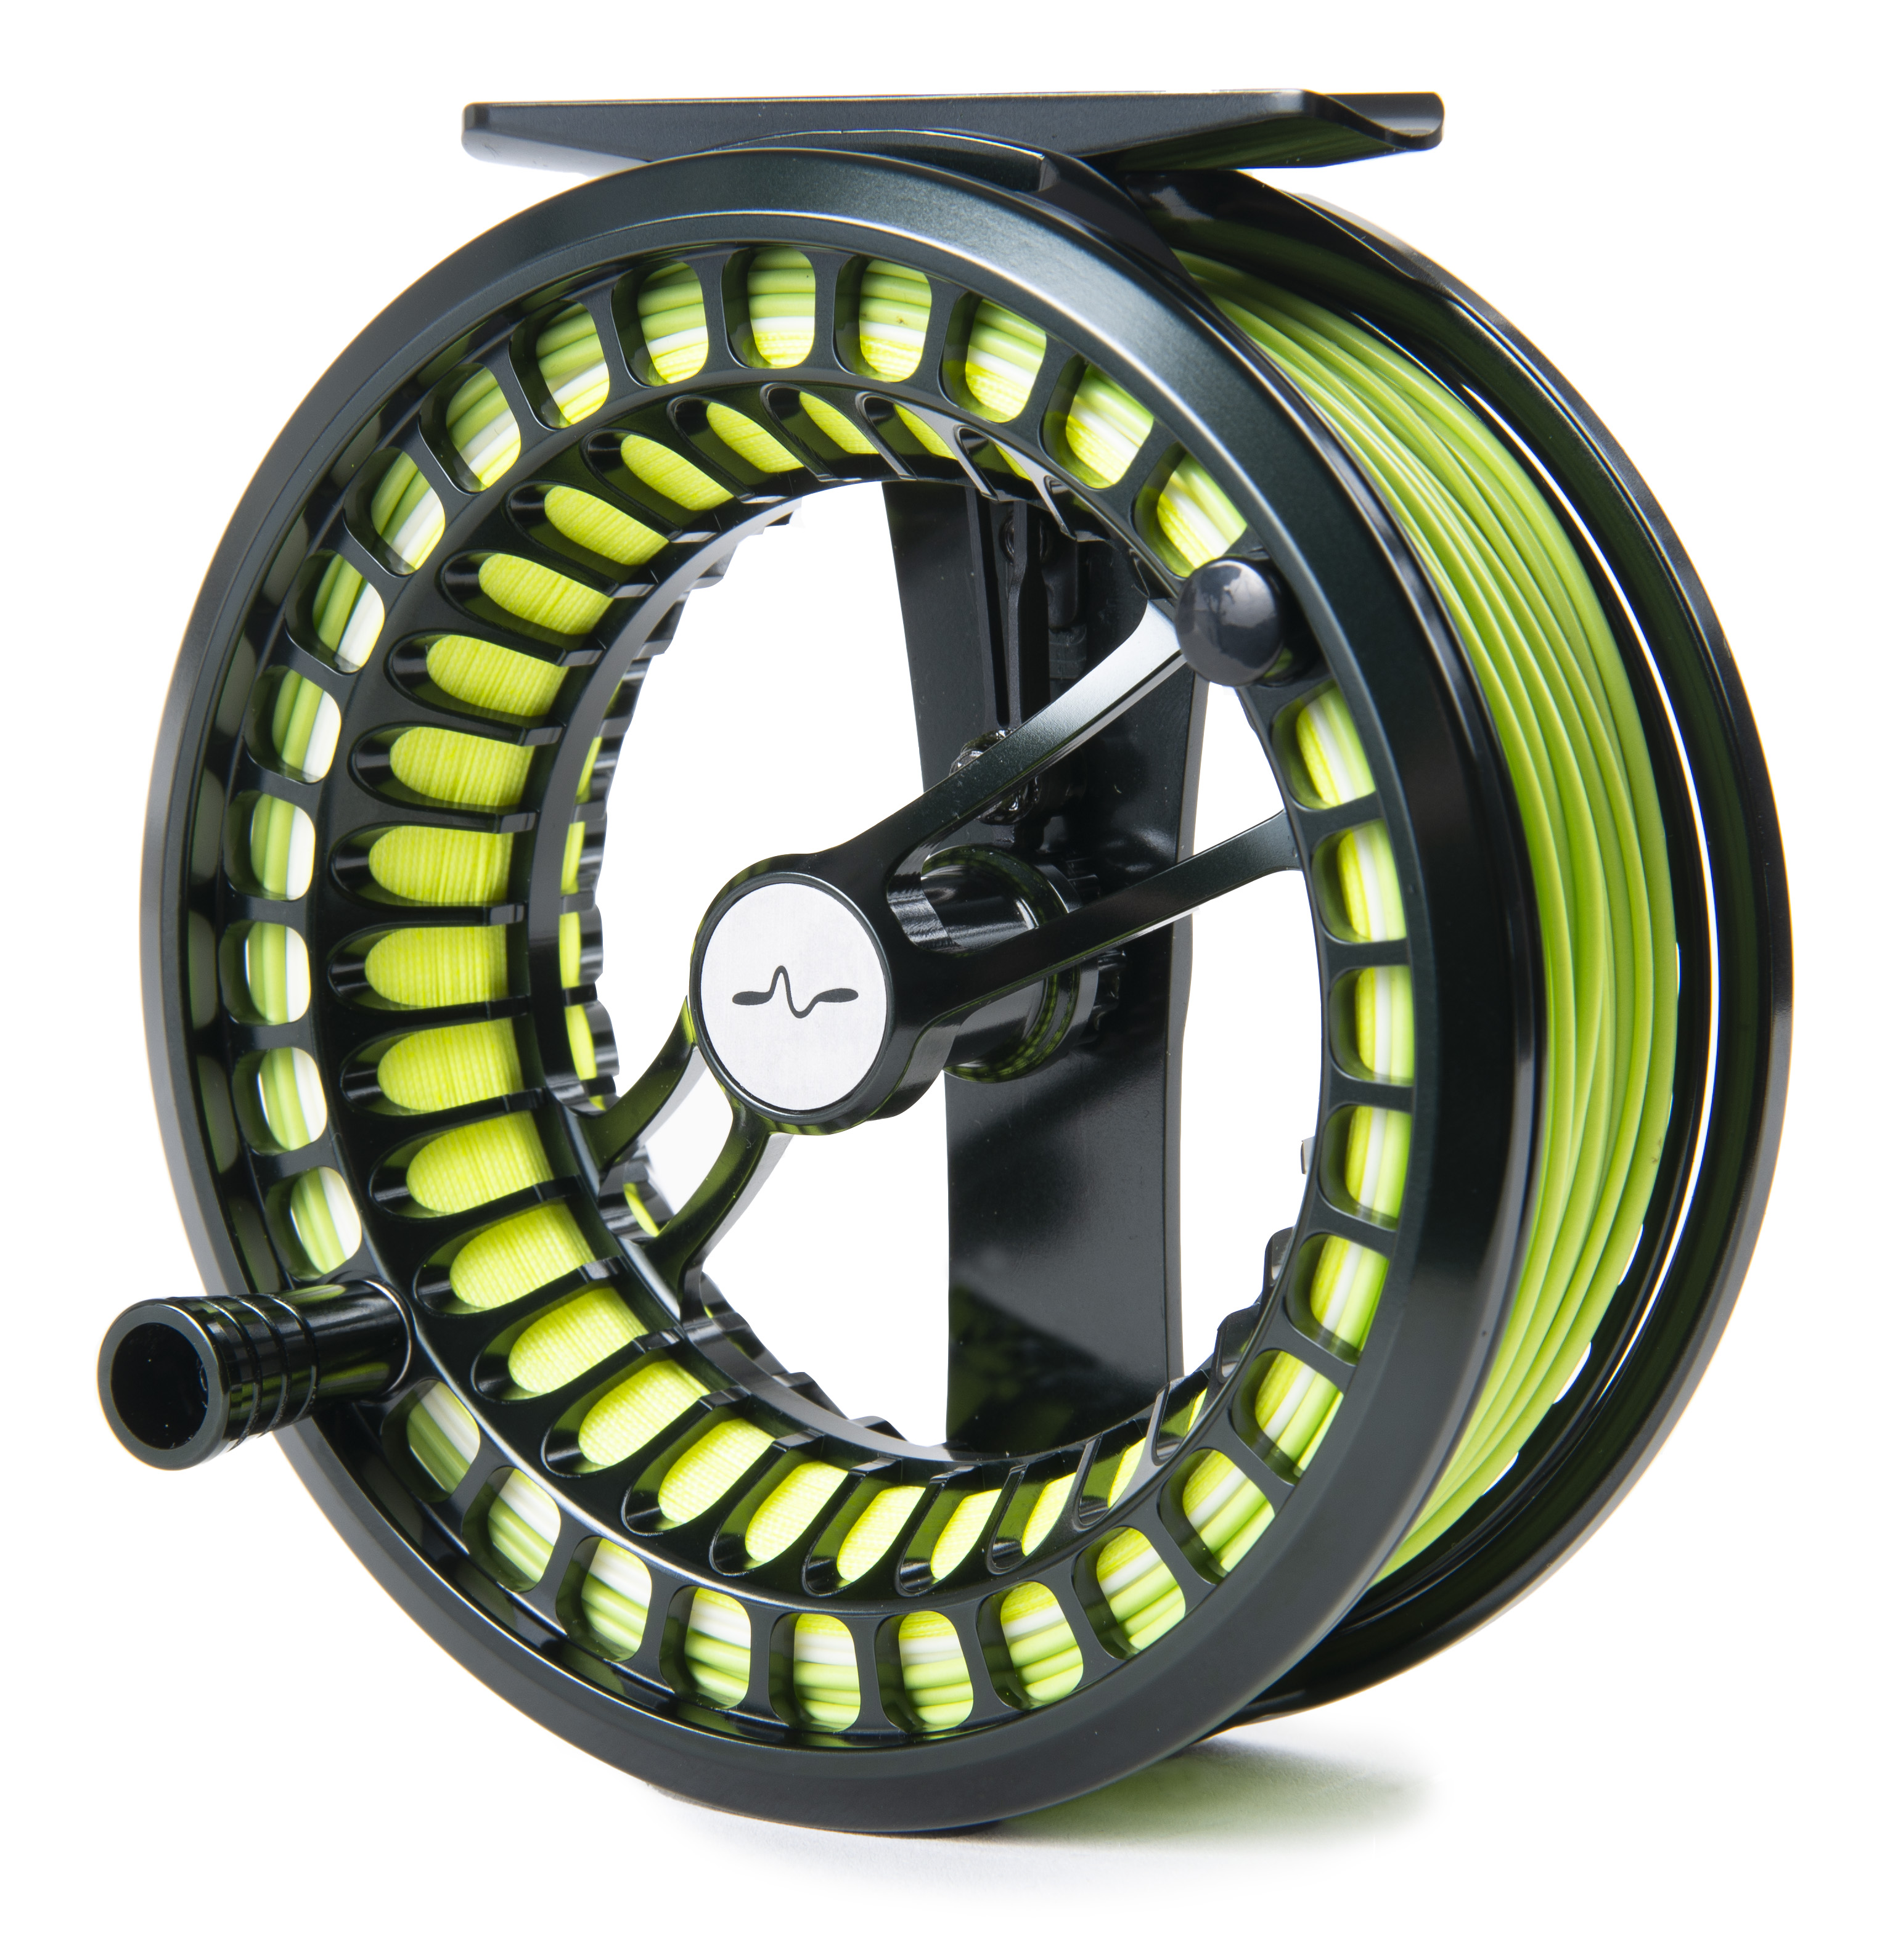 Fly Reel Guideline Fario Click Forest Grey